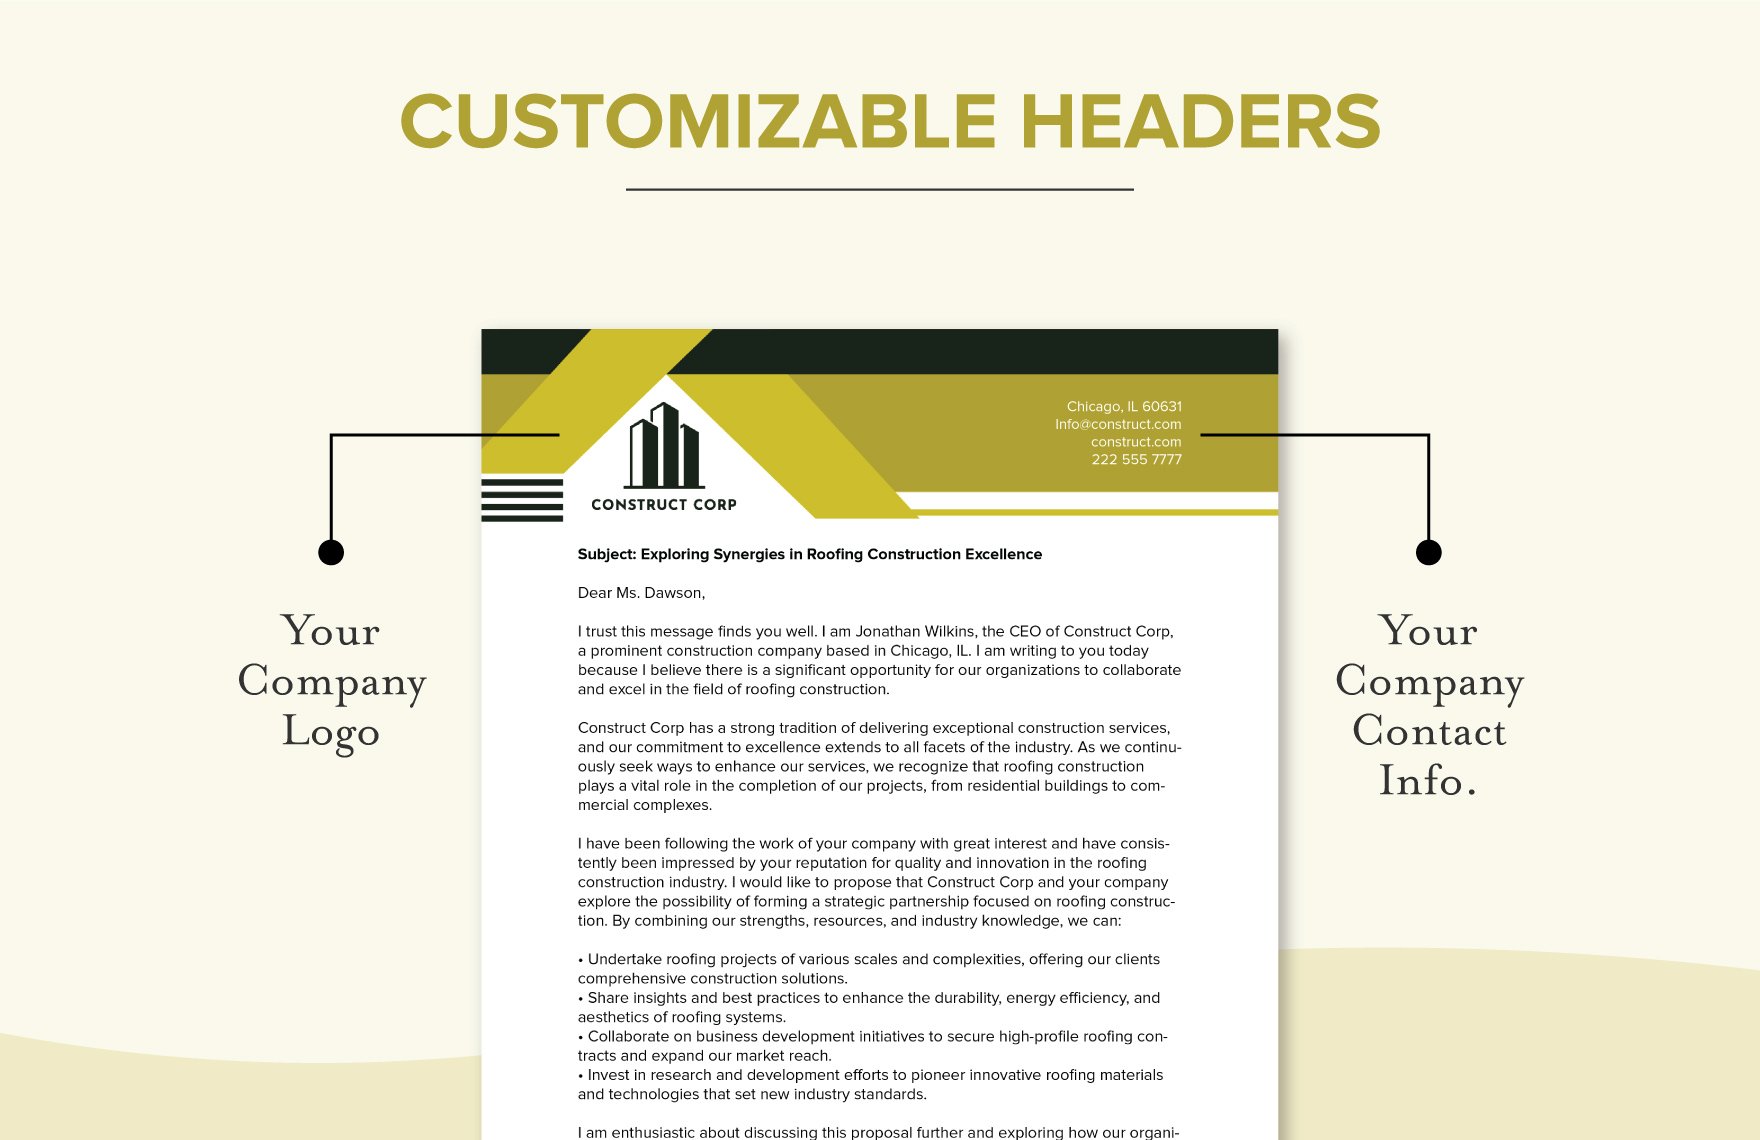 Roofing Construction Letterhead Template